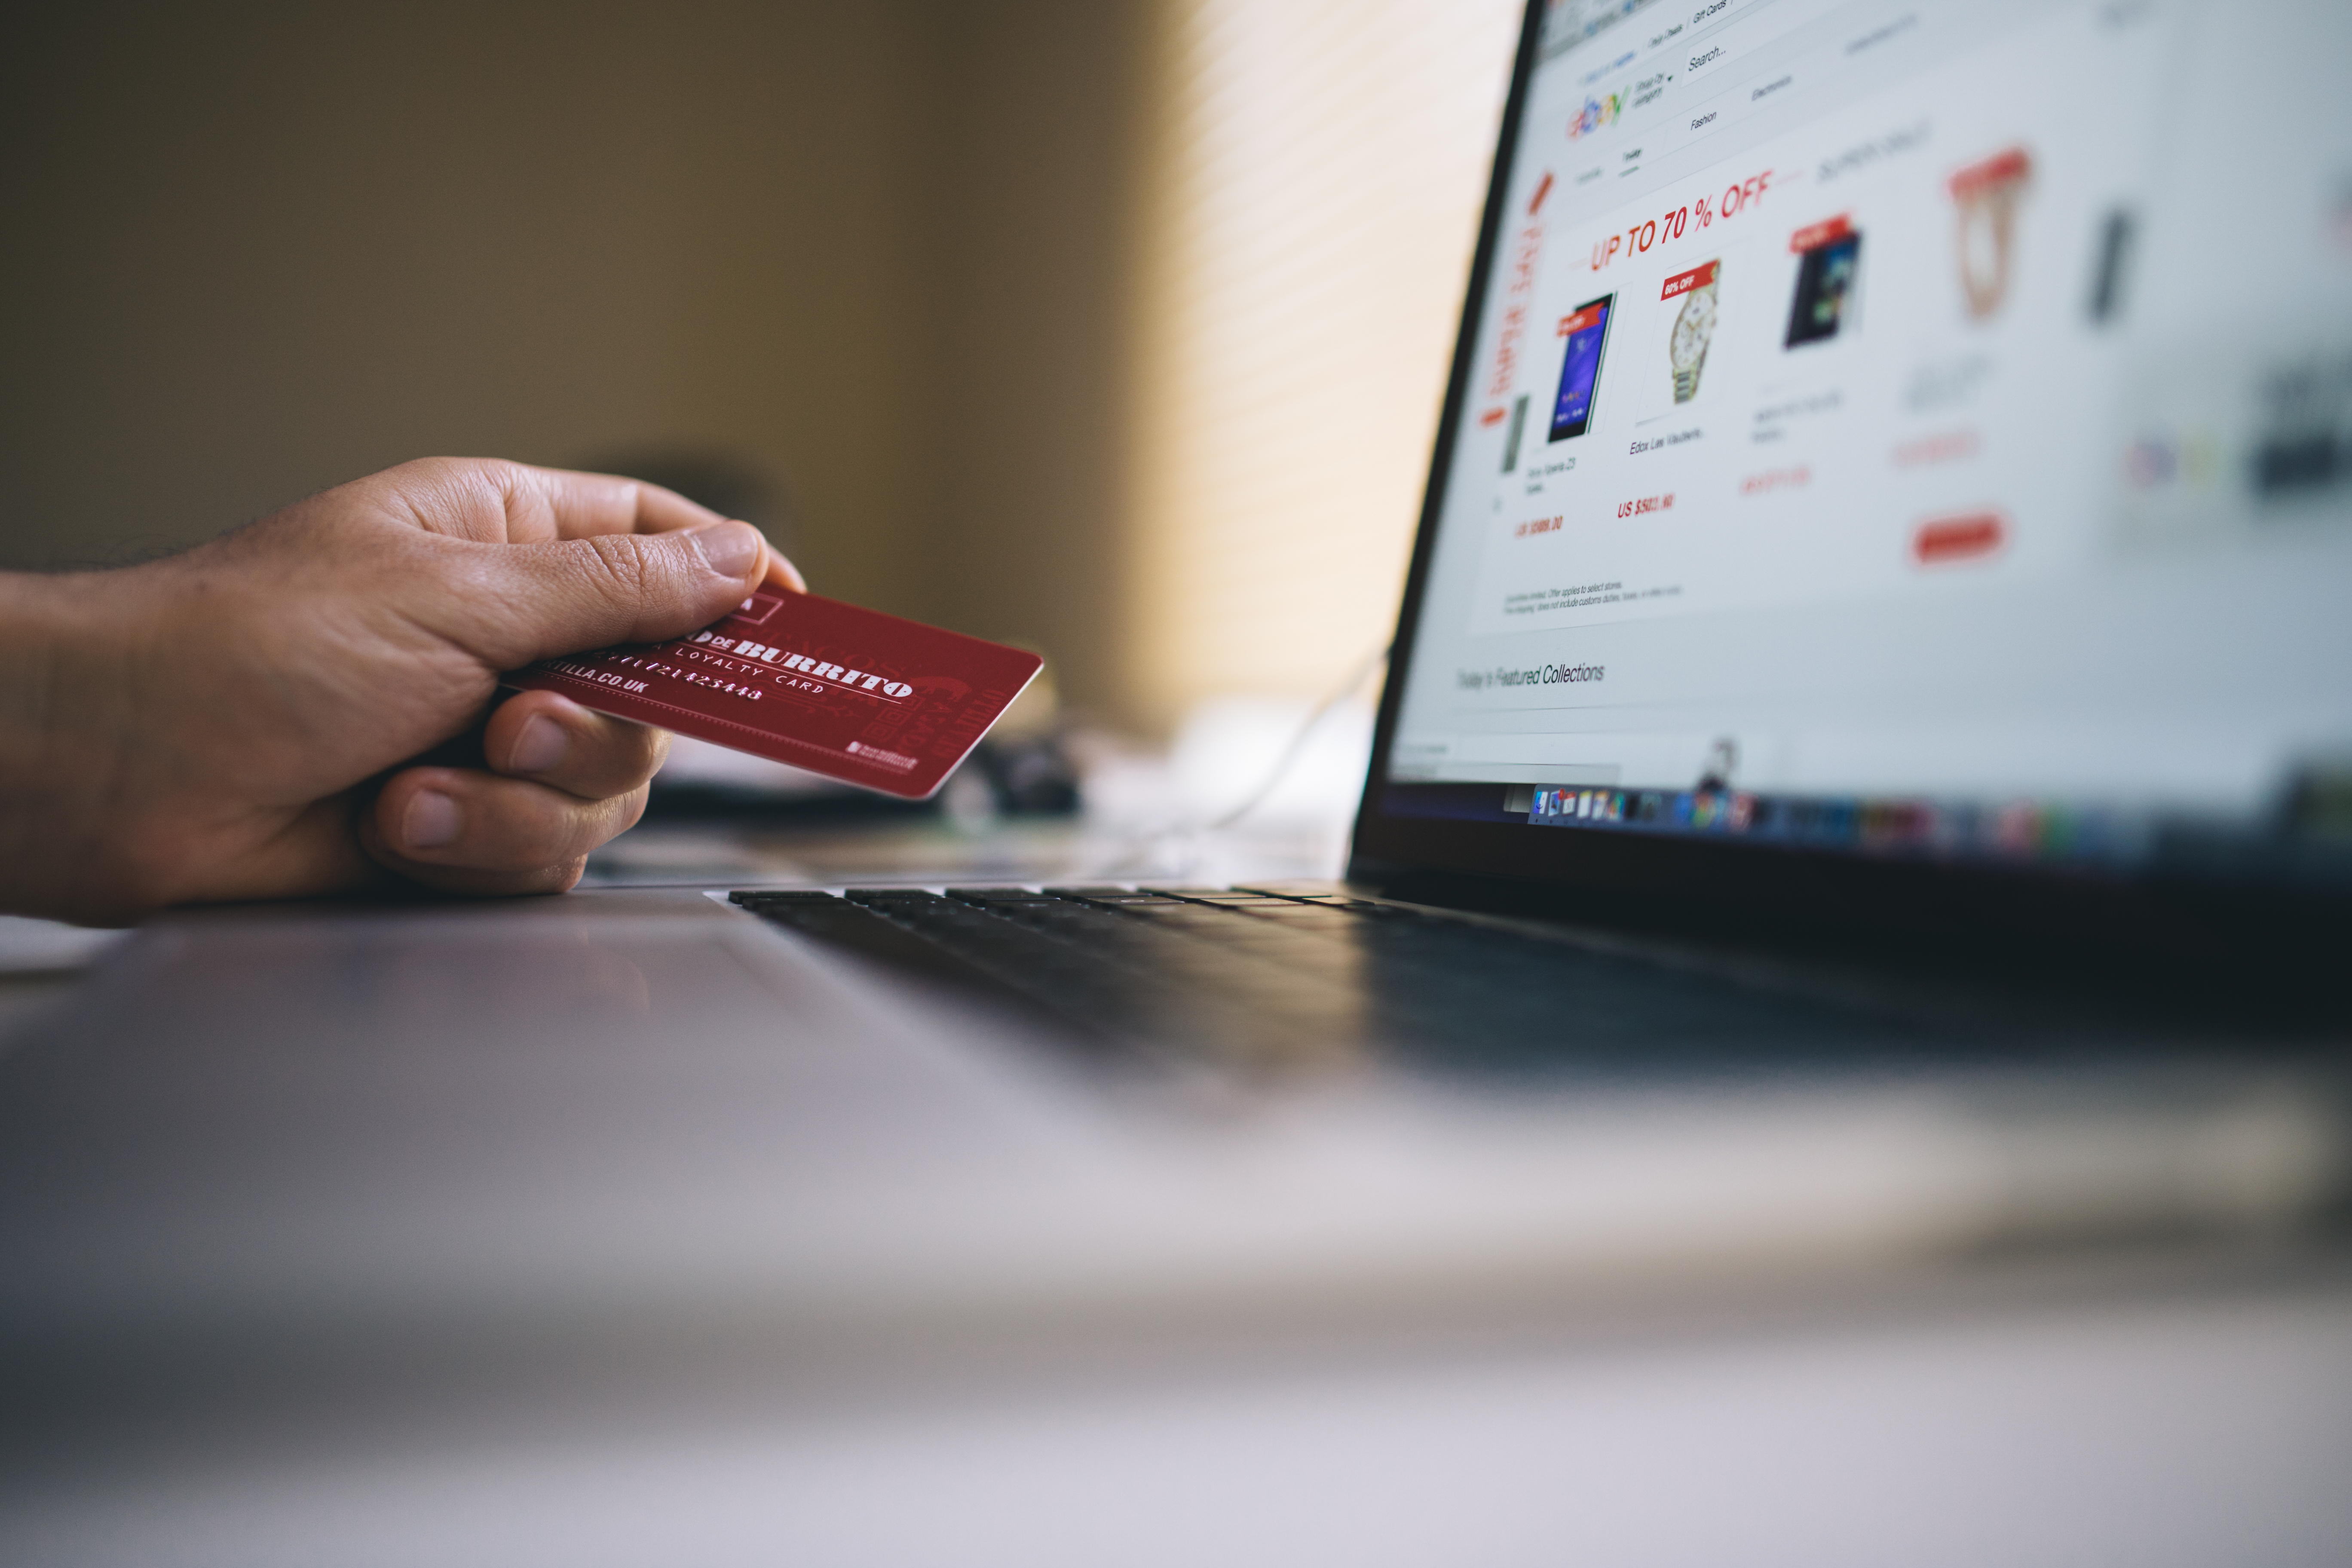 WHY ONLINE SHOPPING IS A BAD HABIT